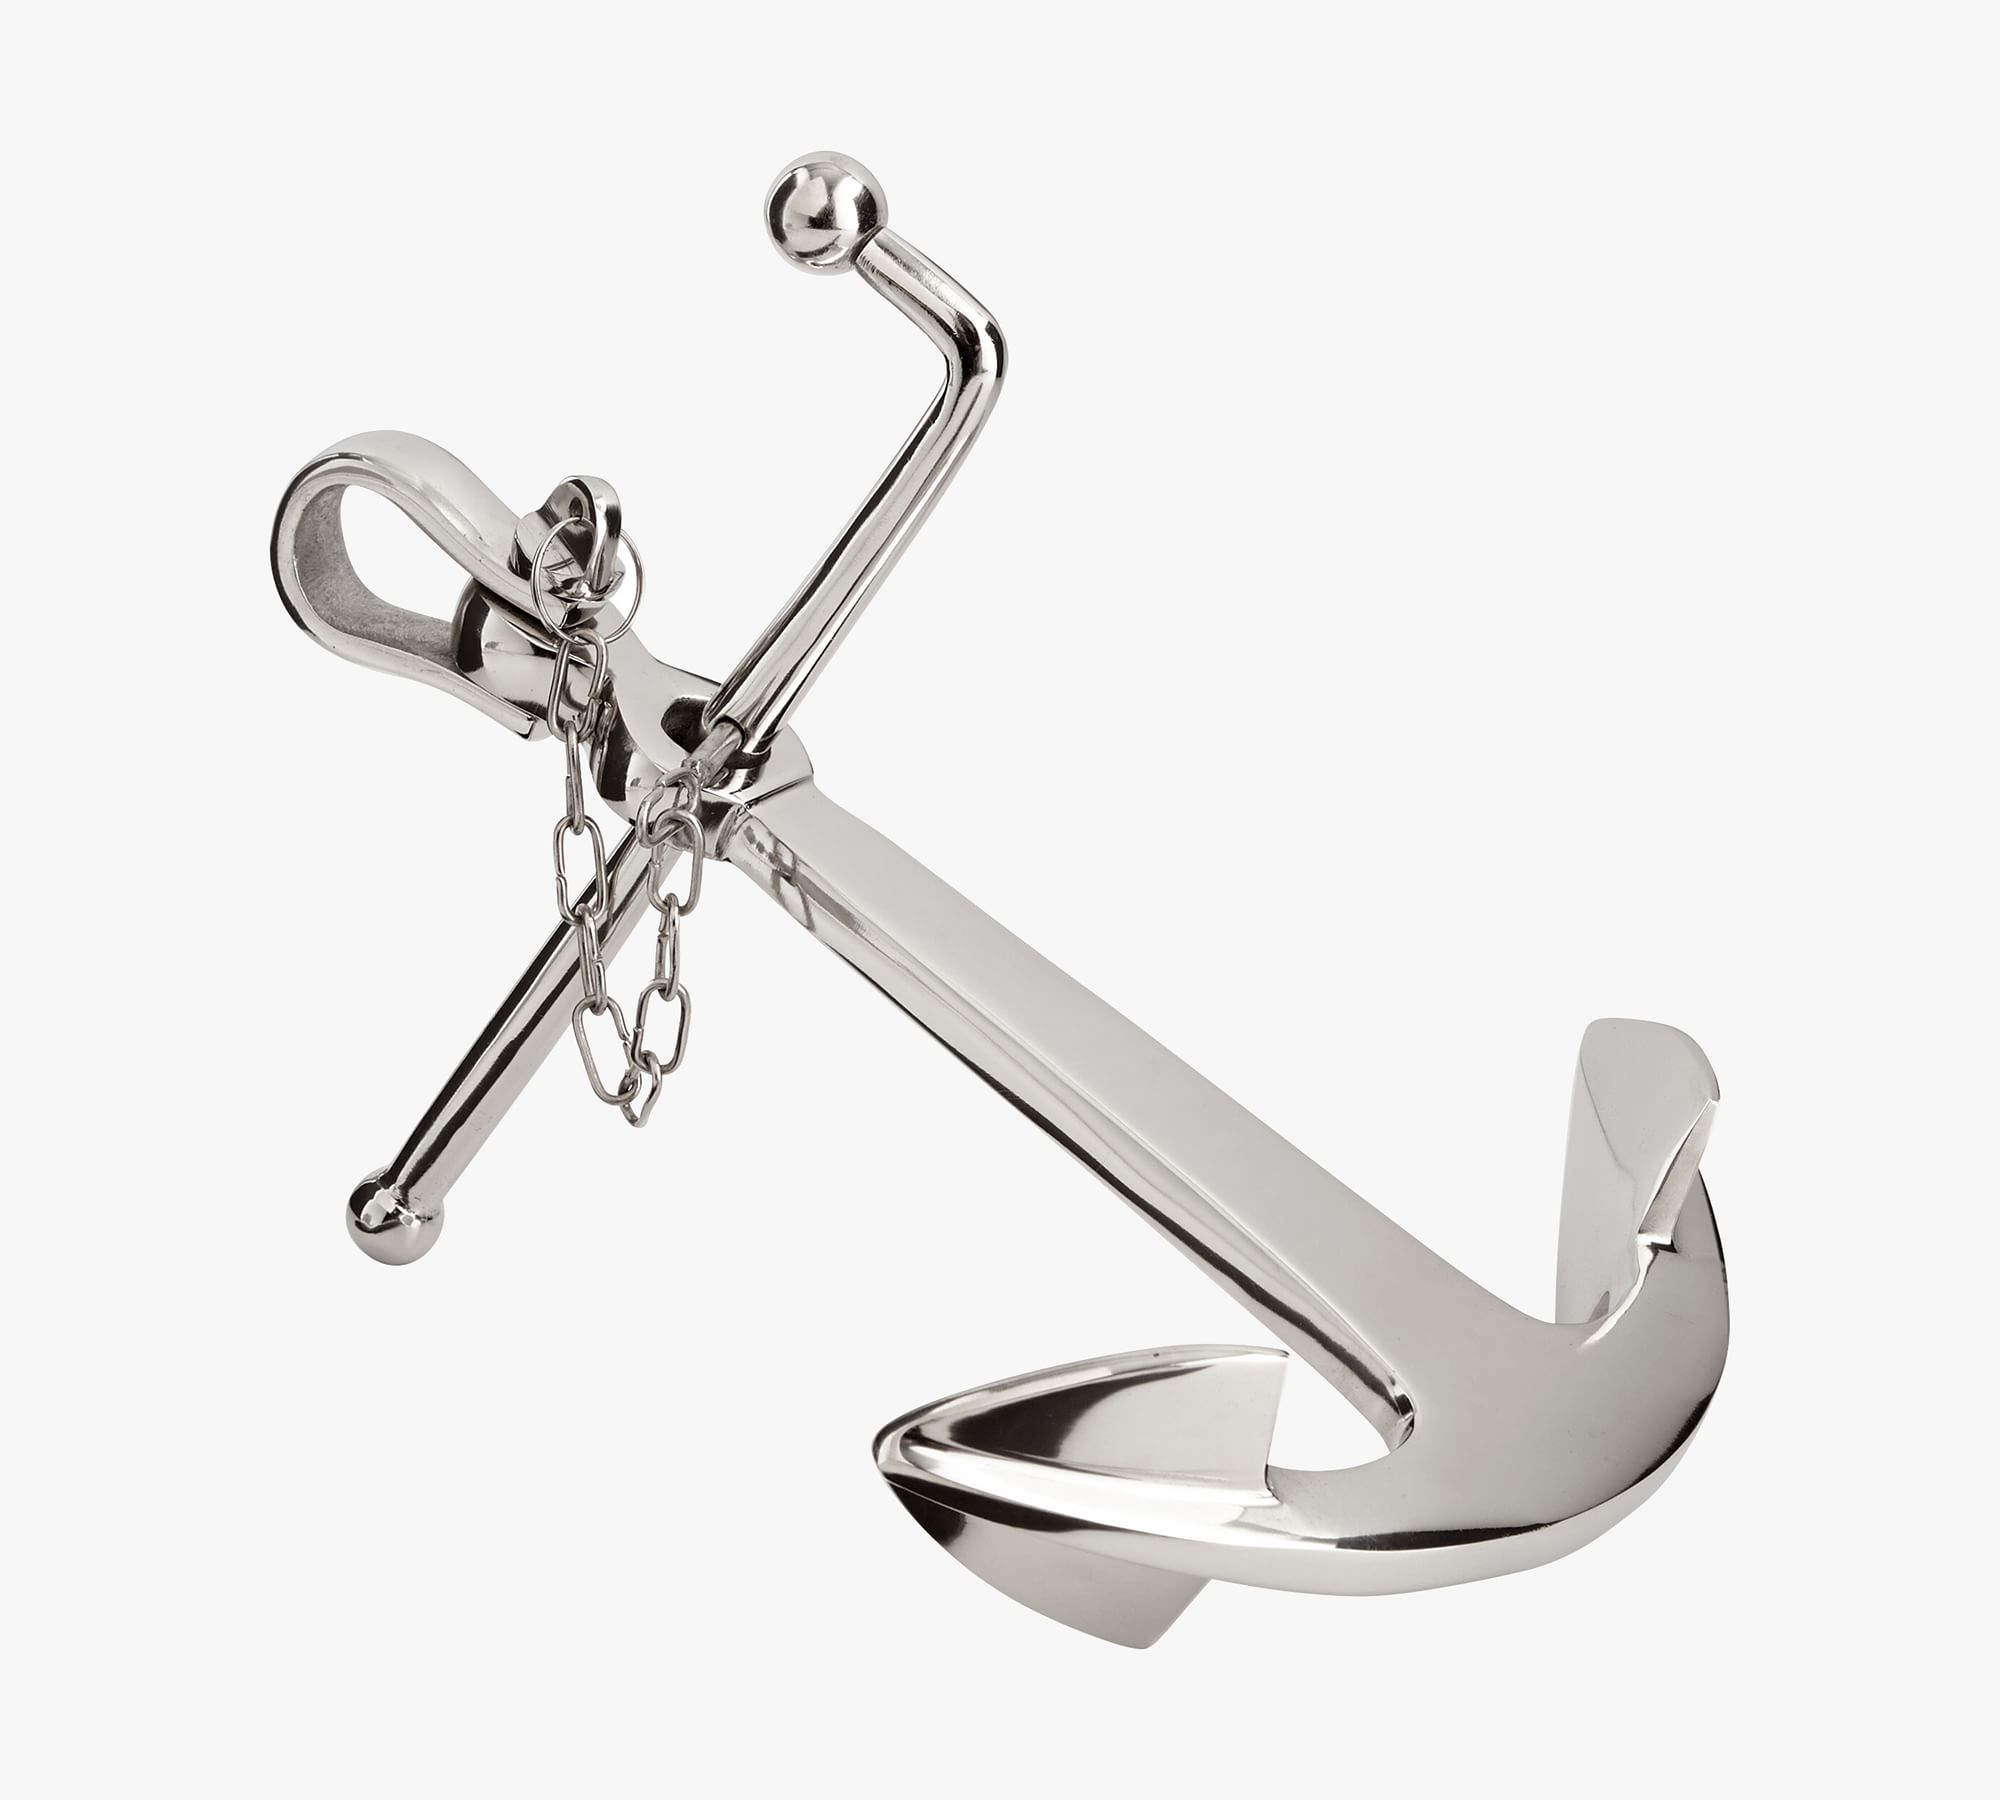 Polished Nickel Anchor Sculpture